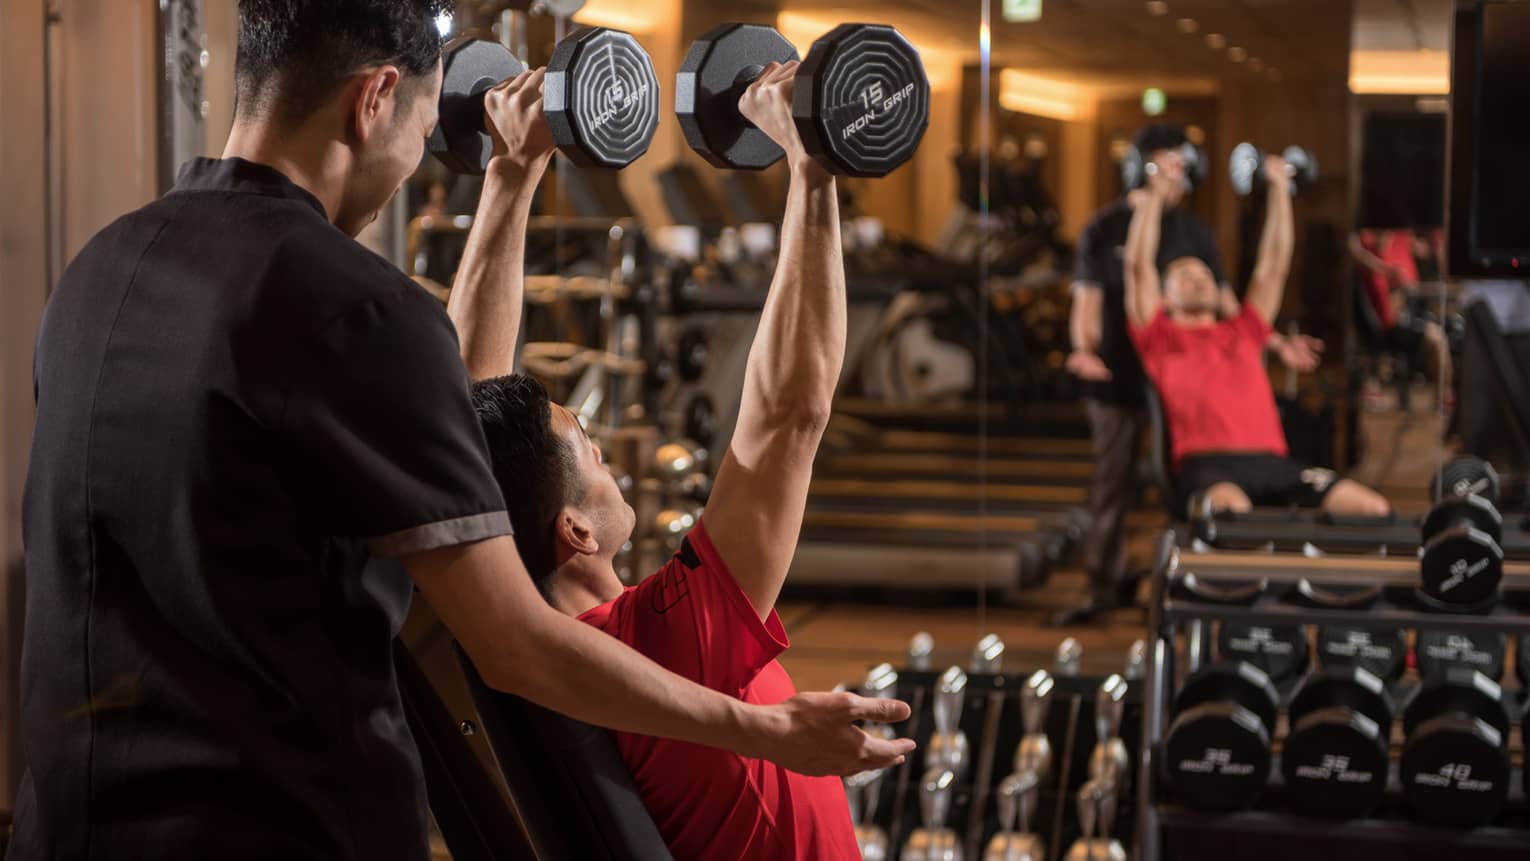 Man in chair in front of mirror lifts two 15-pound weights above his head while personal trainer assists